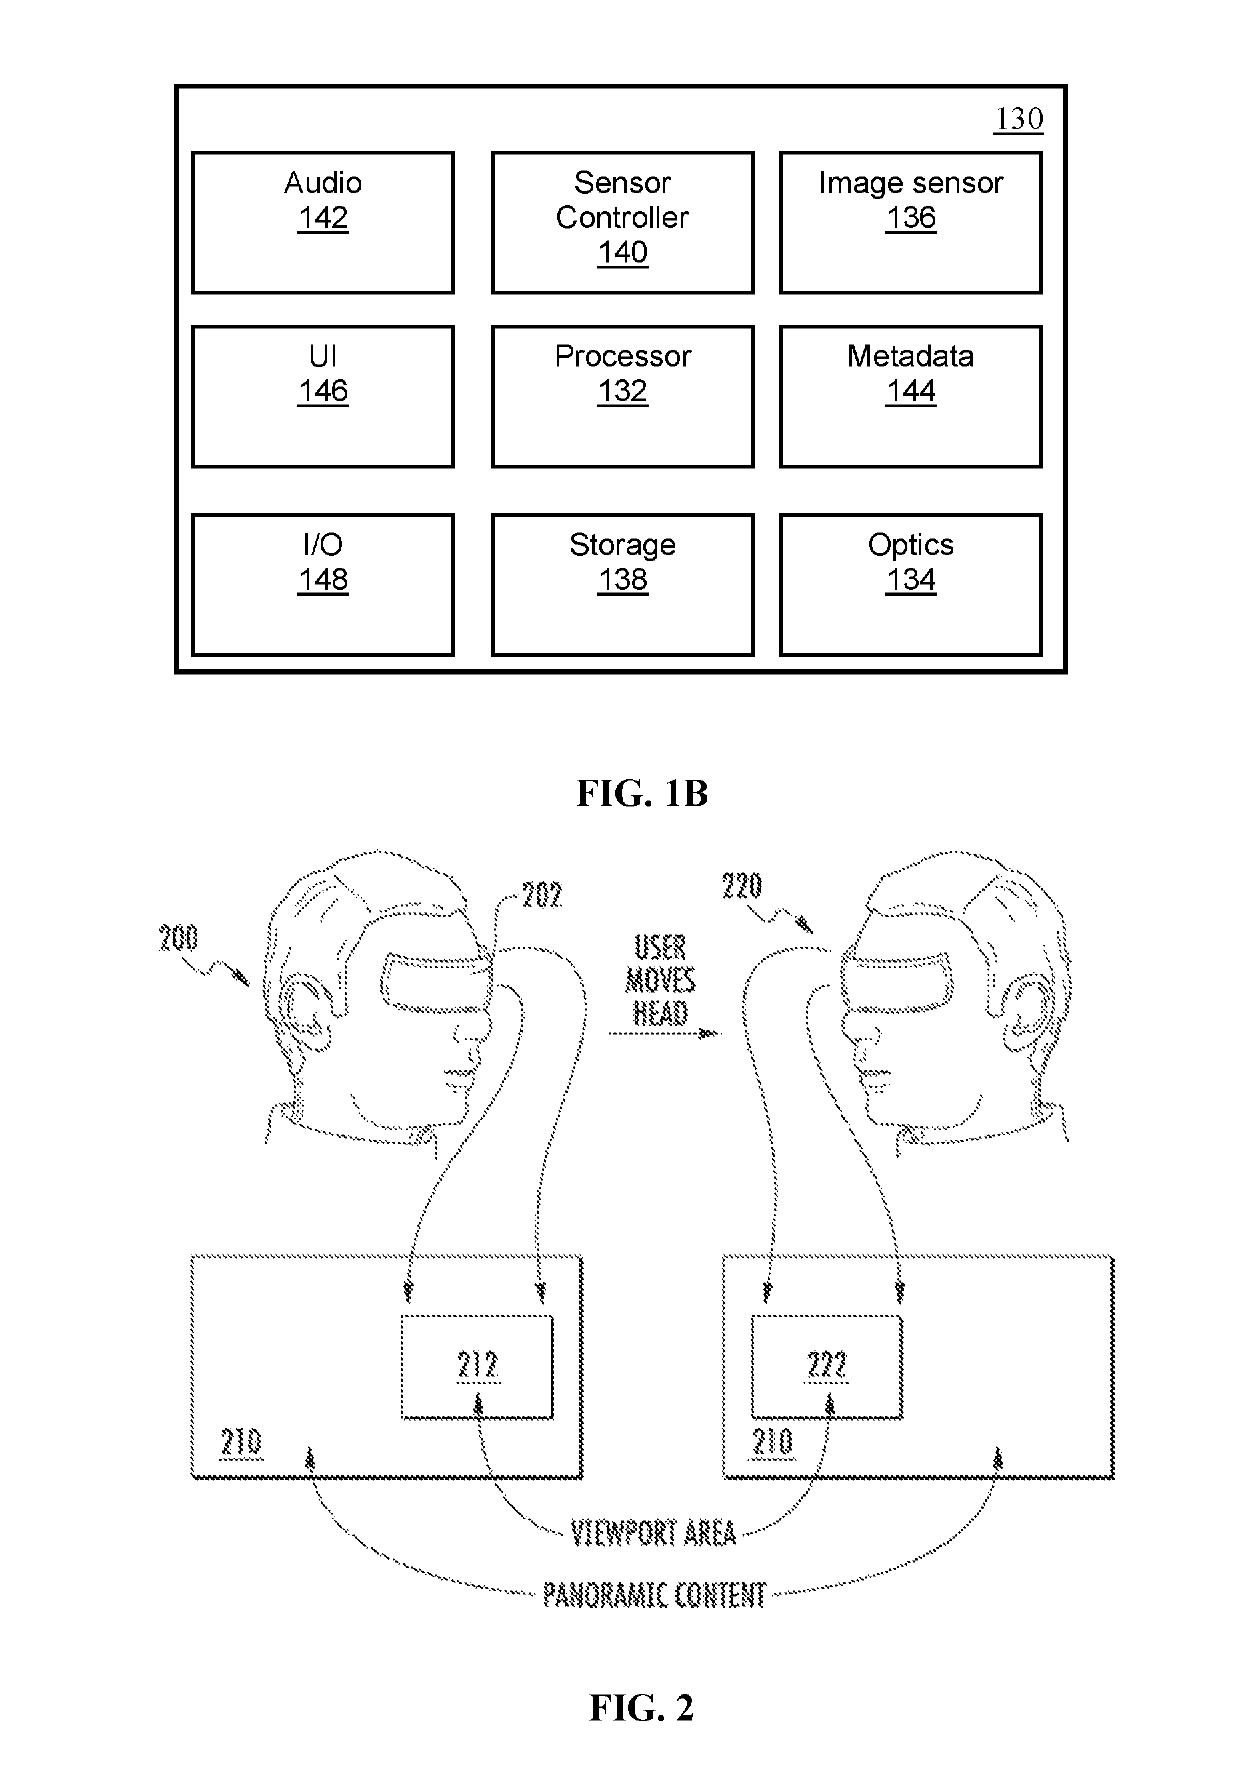 Systems and methods for compressing video content